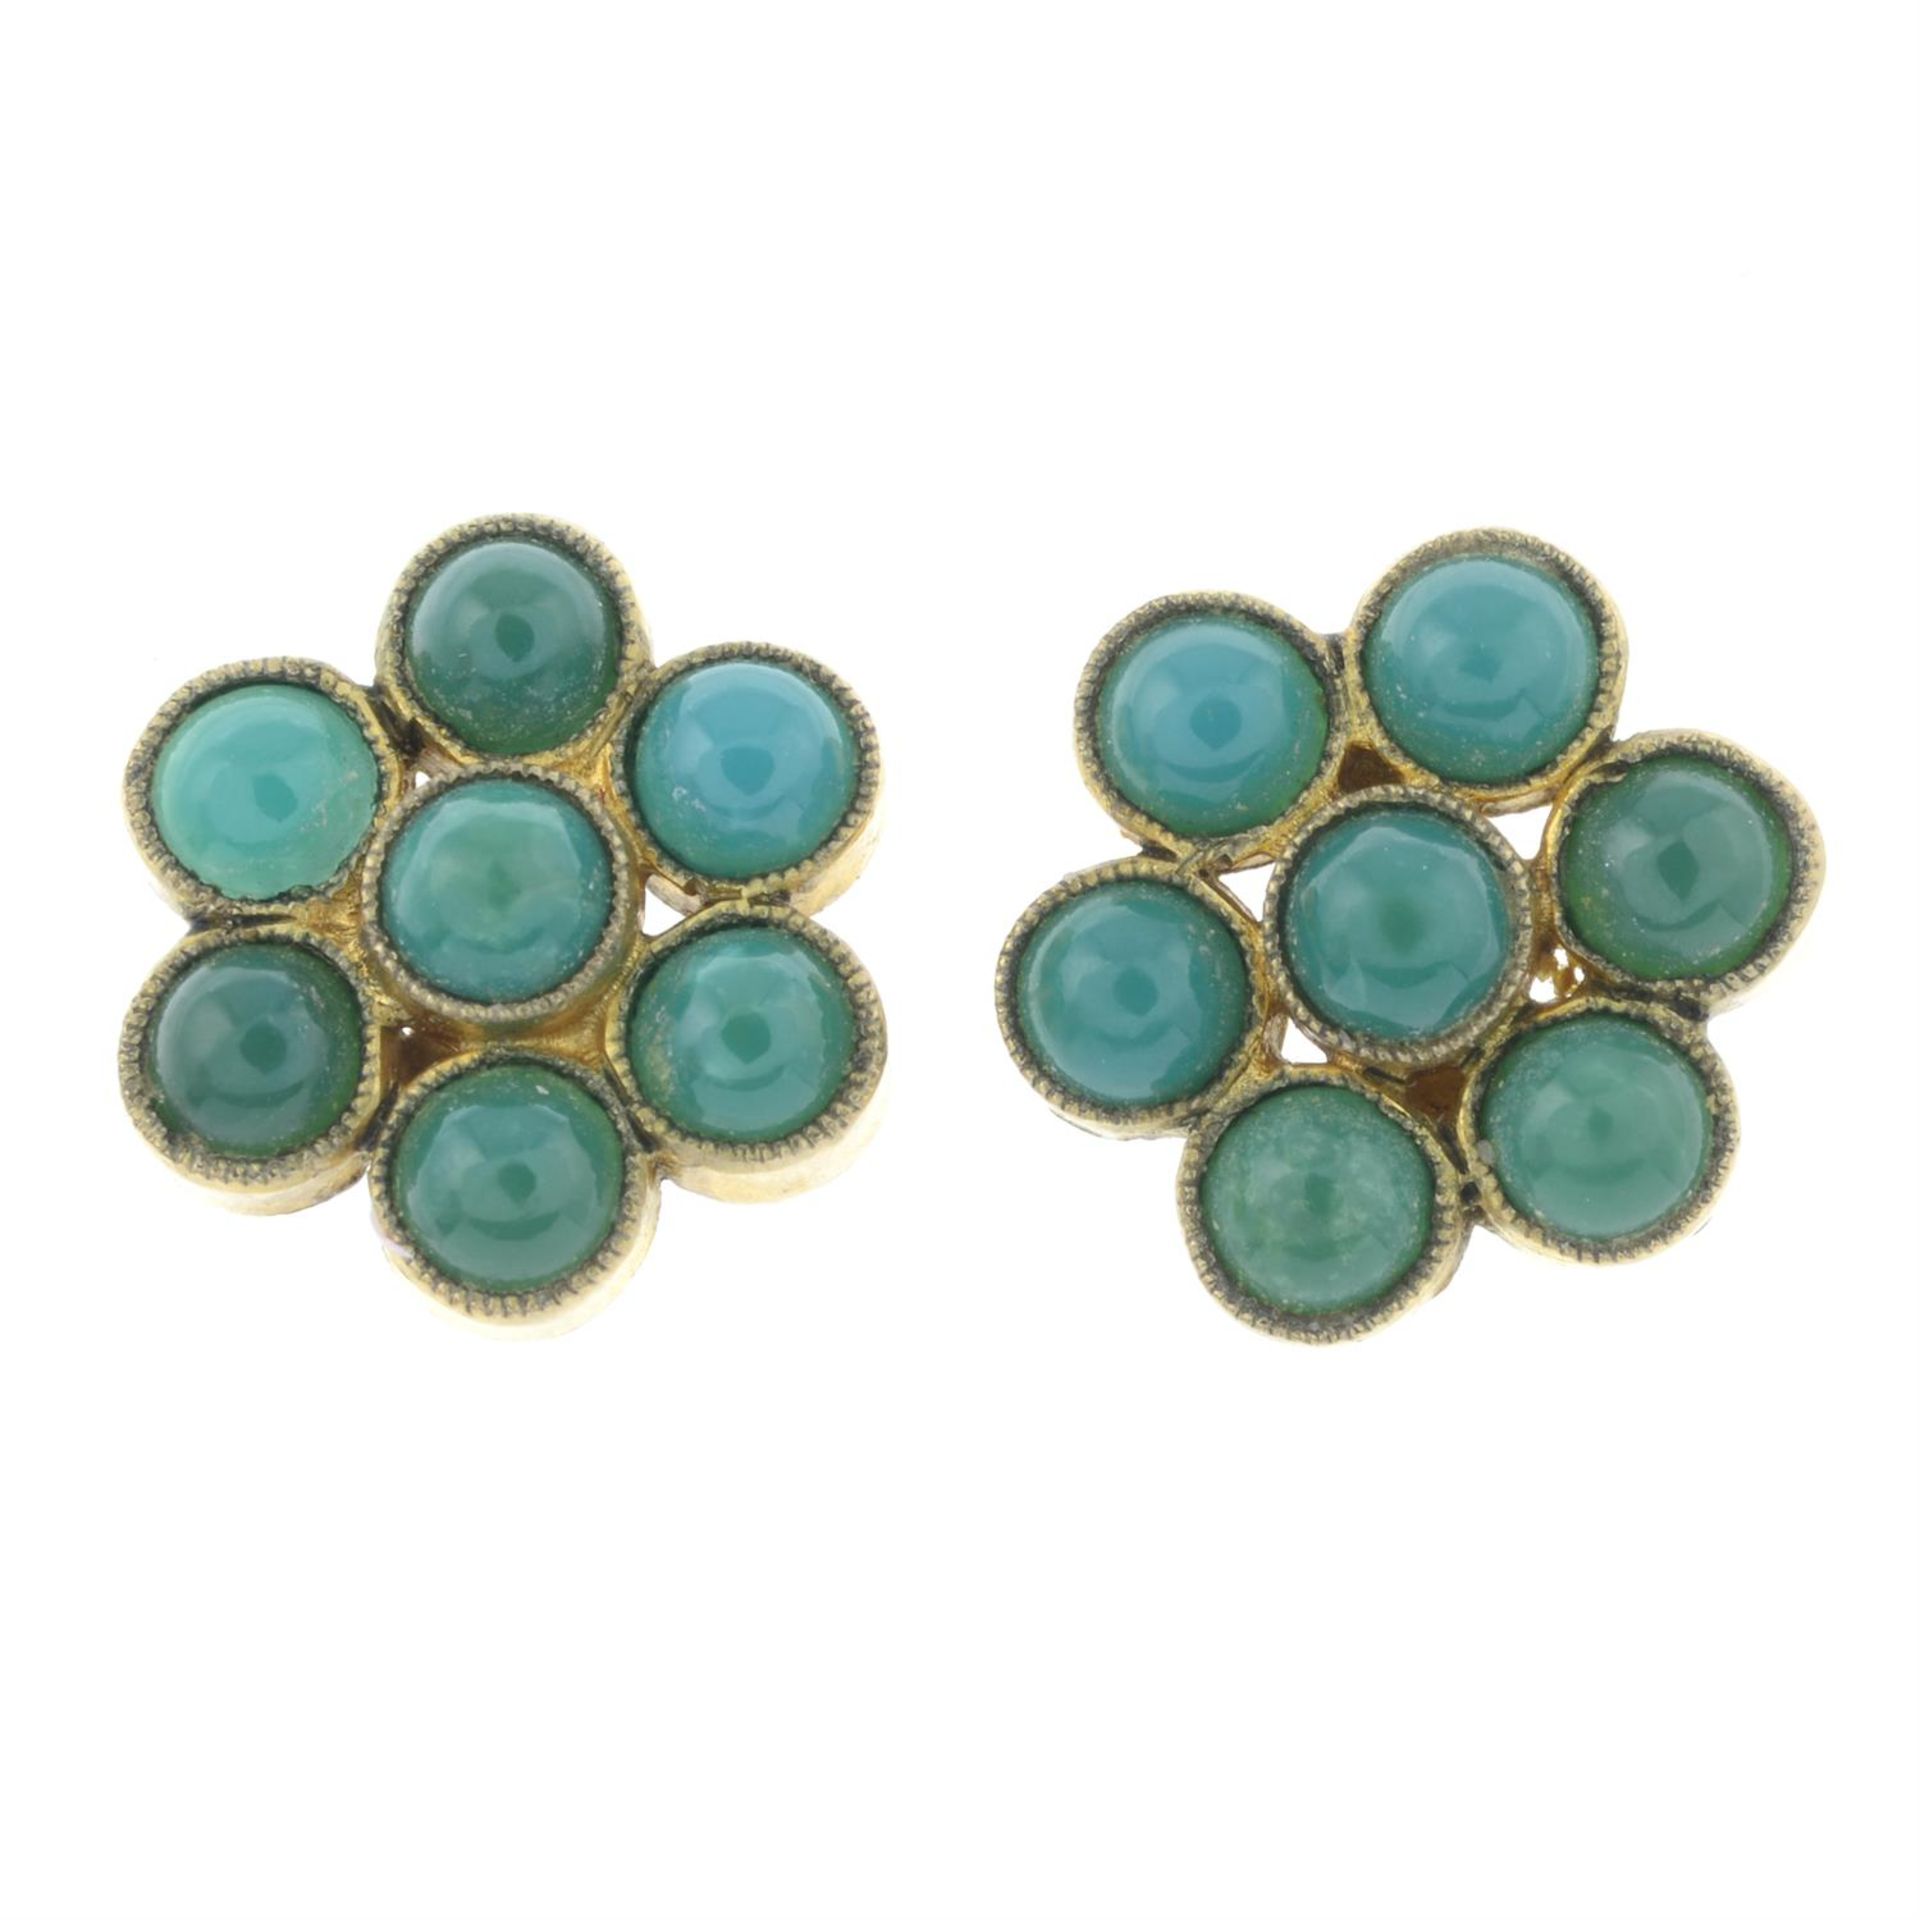 A pair of early to mid 20th century 9ct gold reconstituted turquoise floral cluster earrings.